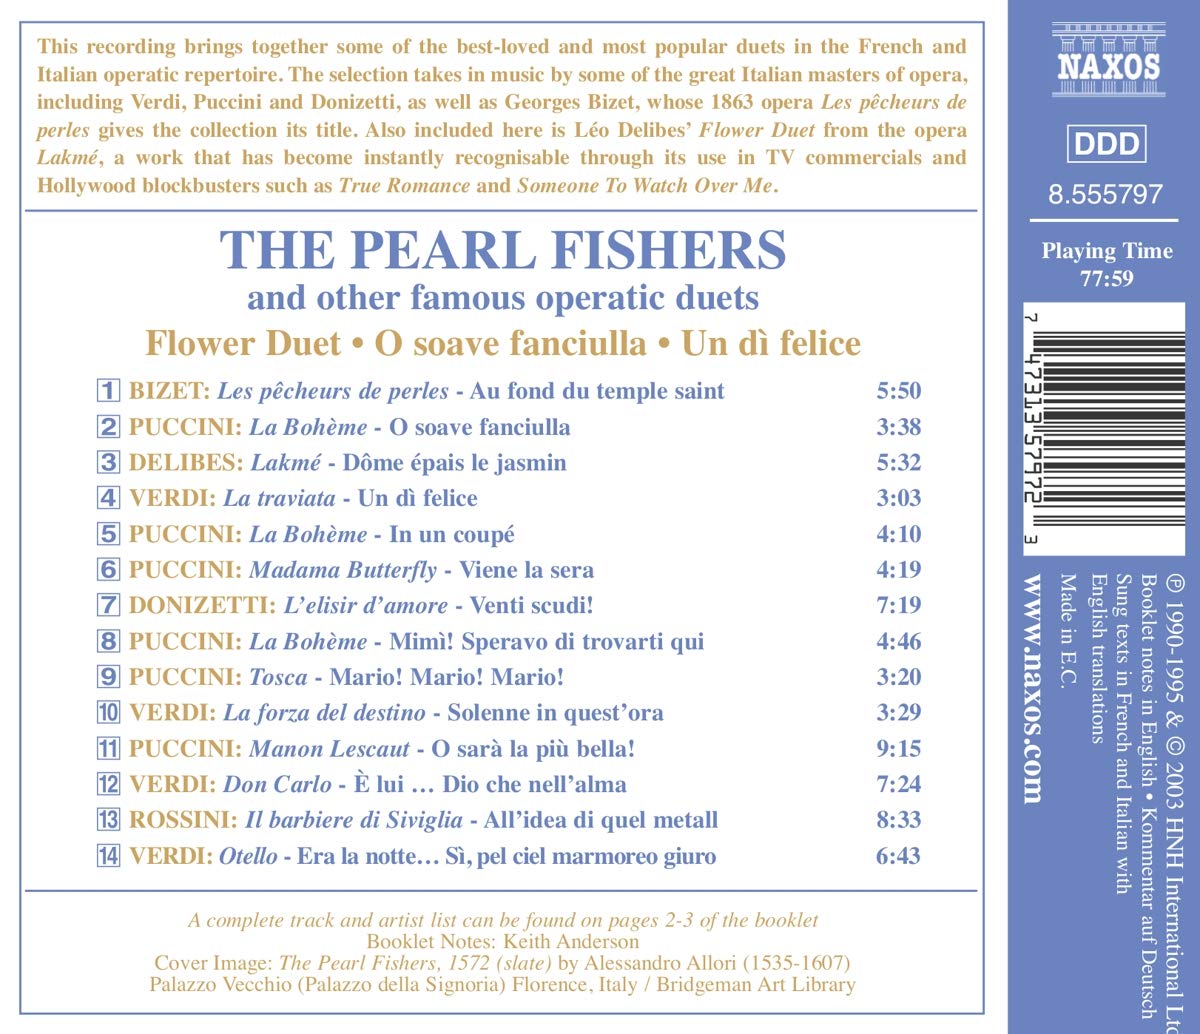 The Pearl Fishers and Other Famous Operatic Duets - slide-1